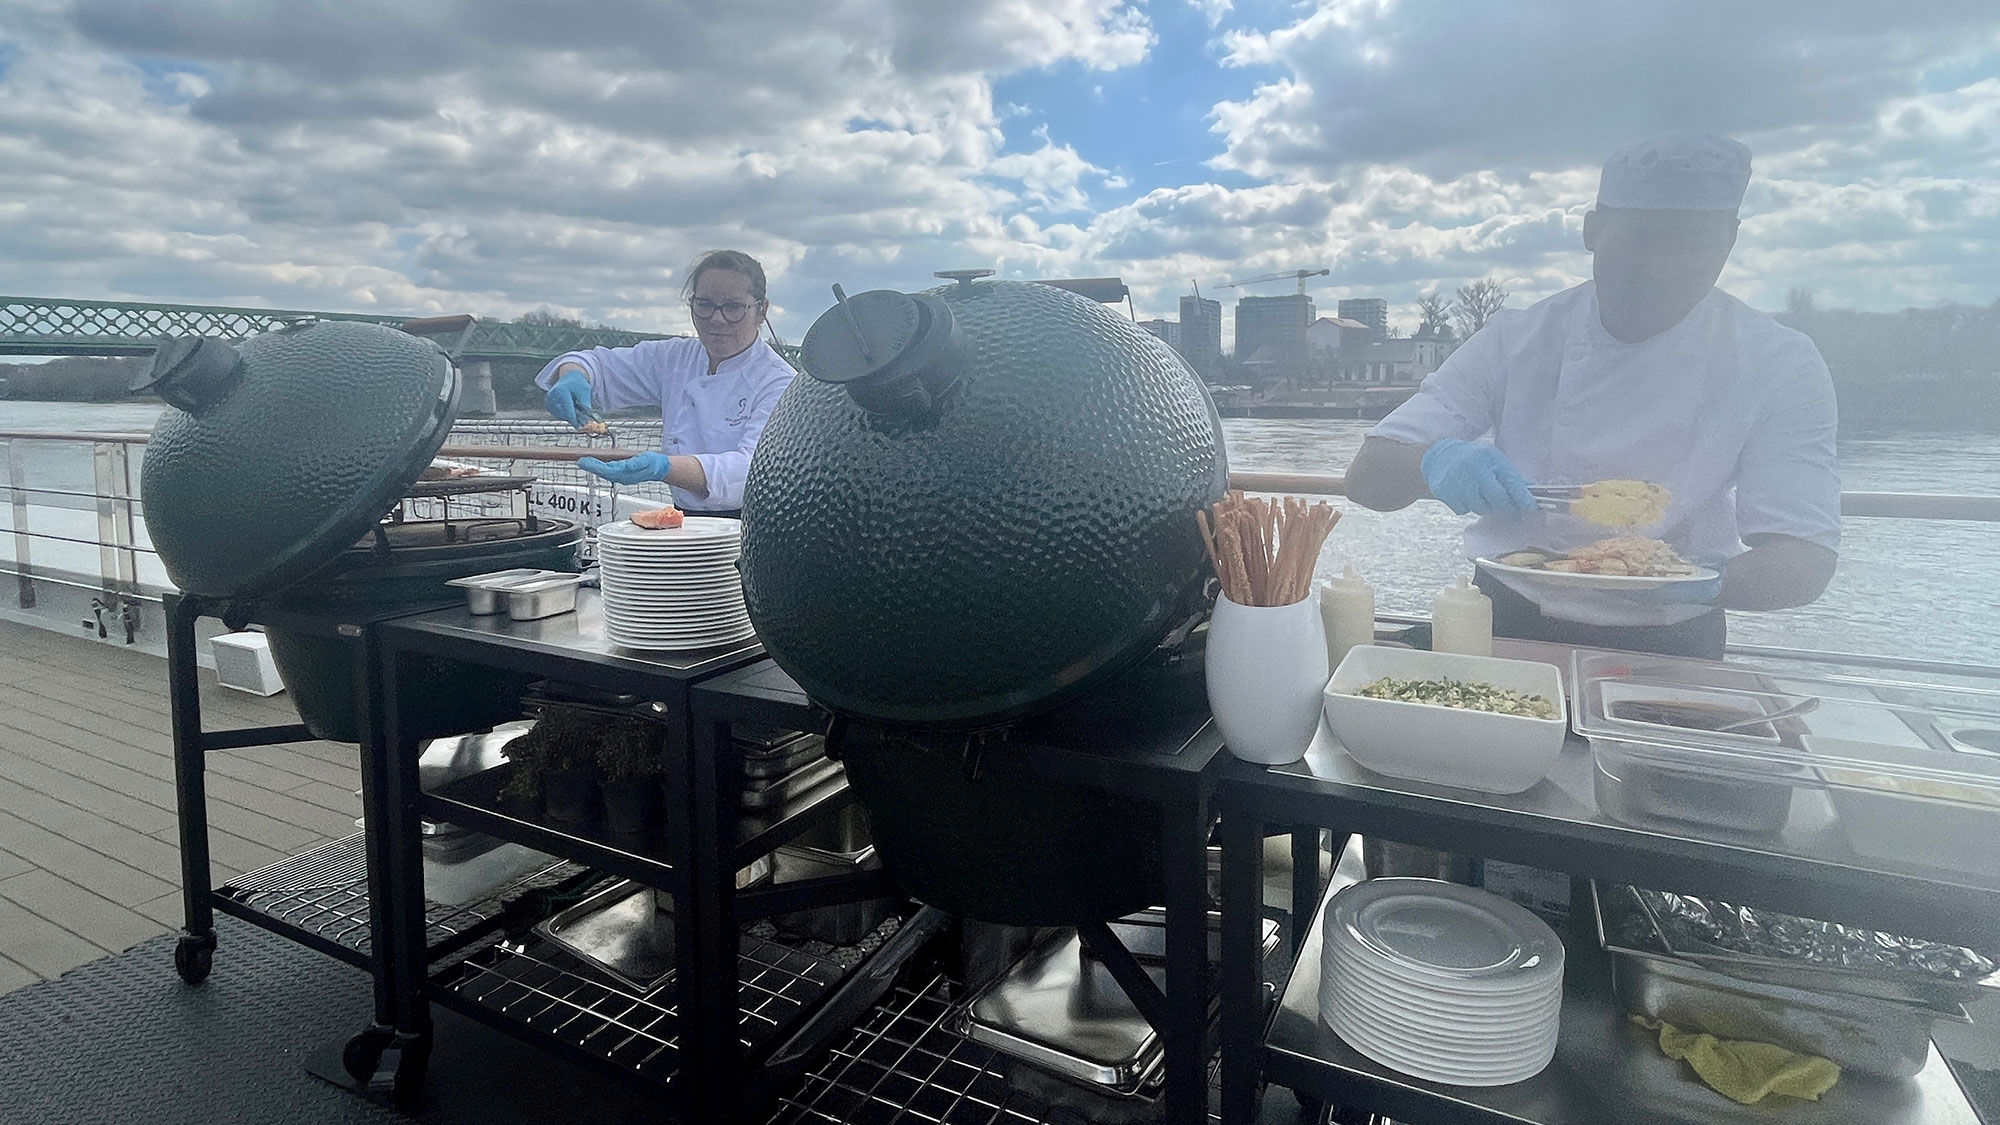 Riverside Mozart staff grill lunch for guests on the sun deck.